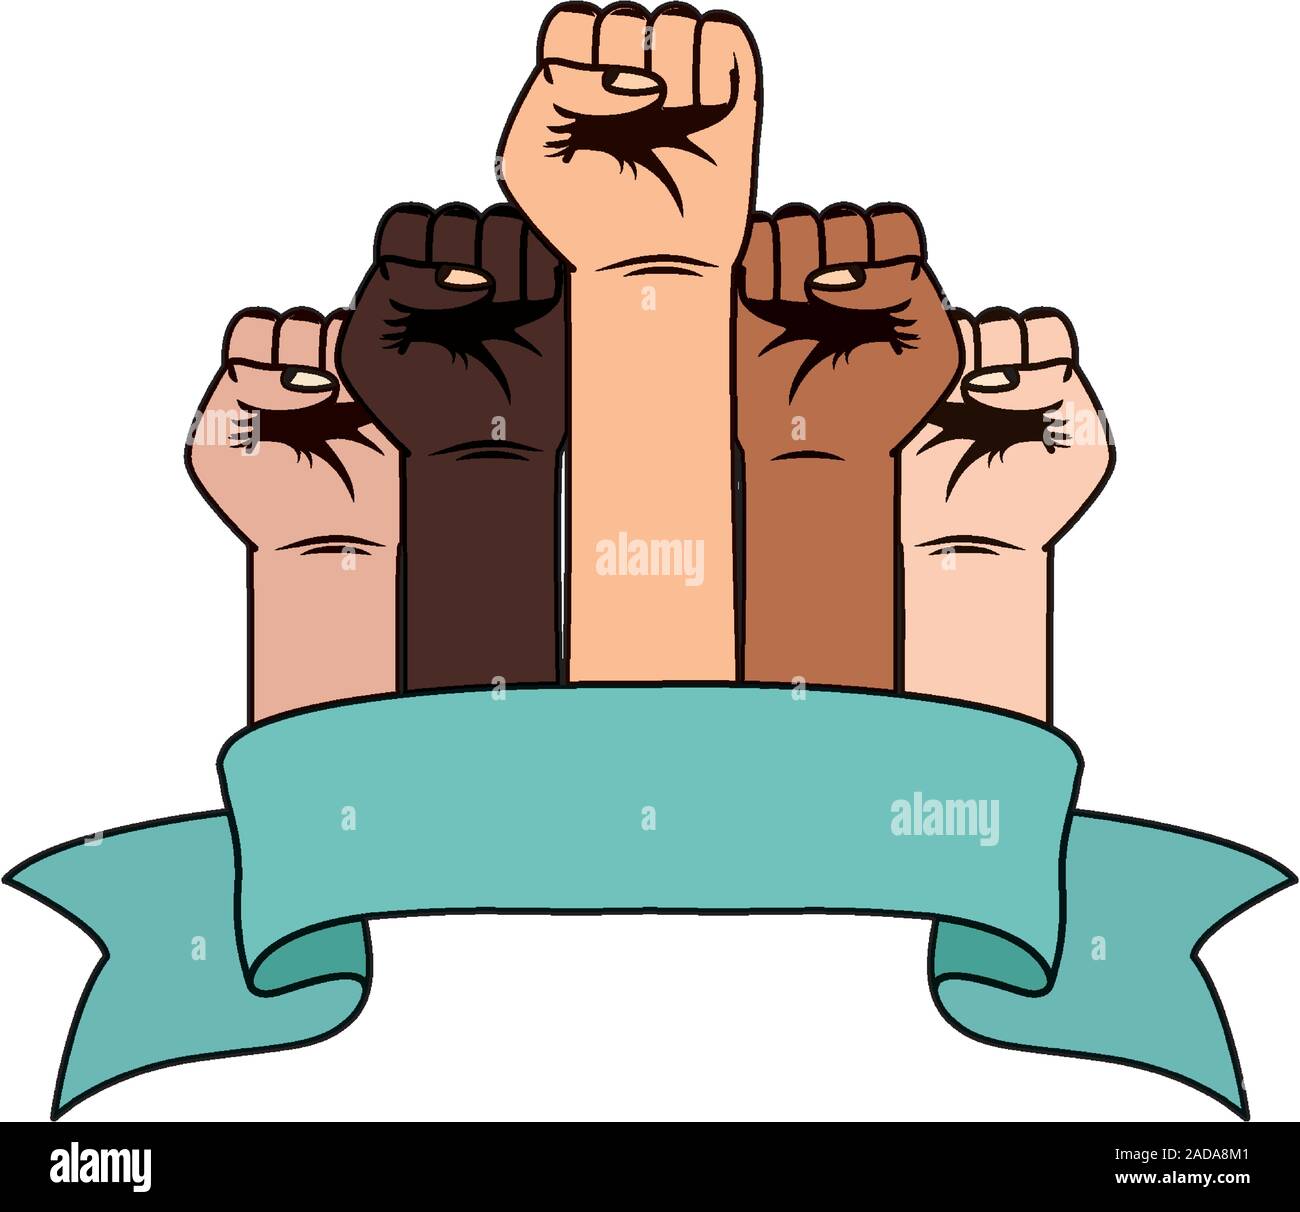 Interracial Hands Fist With Ribbon Frame Stock Vector Image And Art Alamy